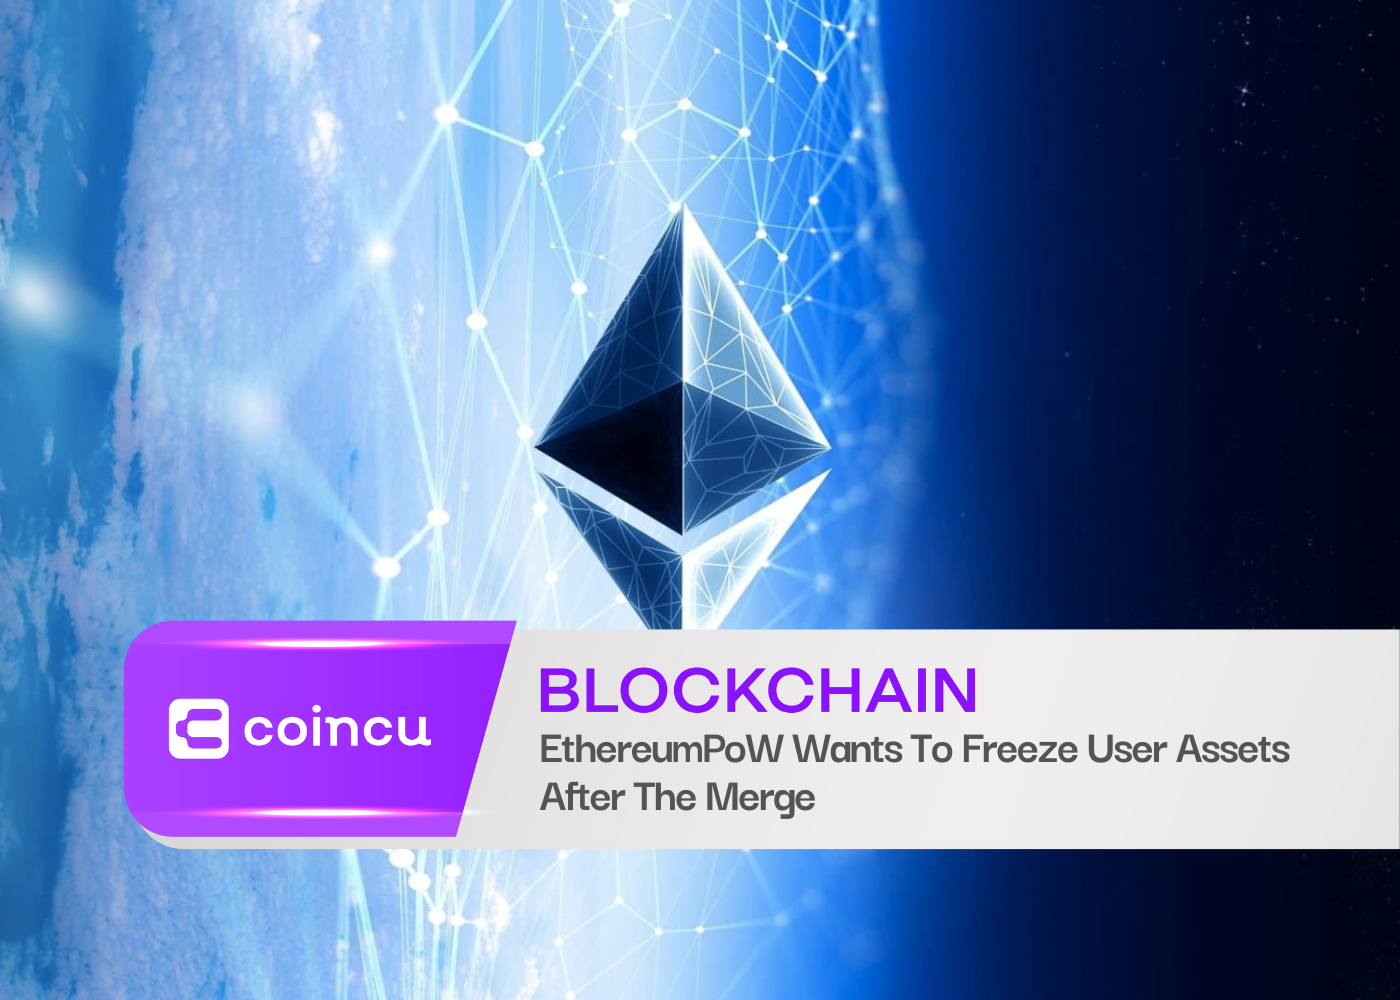 EthereumPoW Wants To Freeze User Assets After The Merge